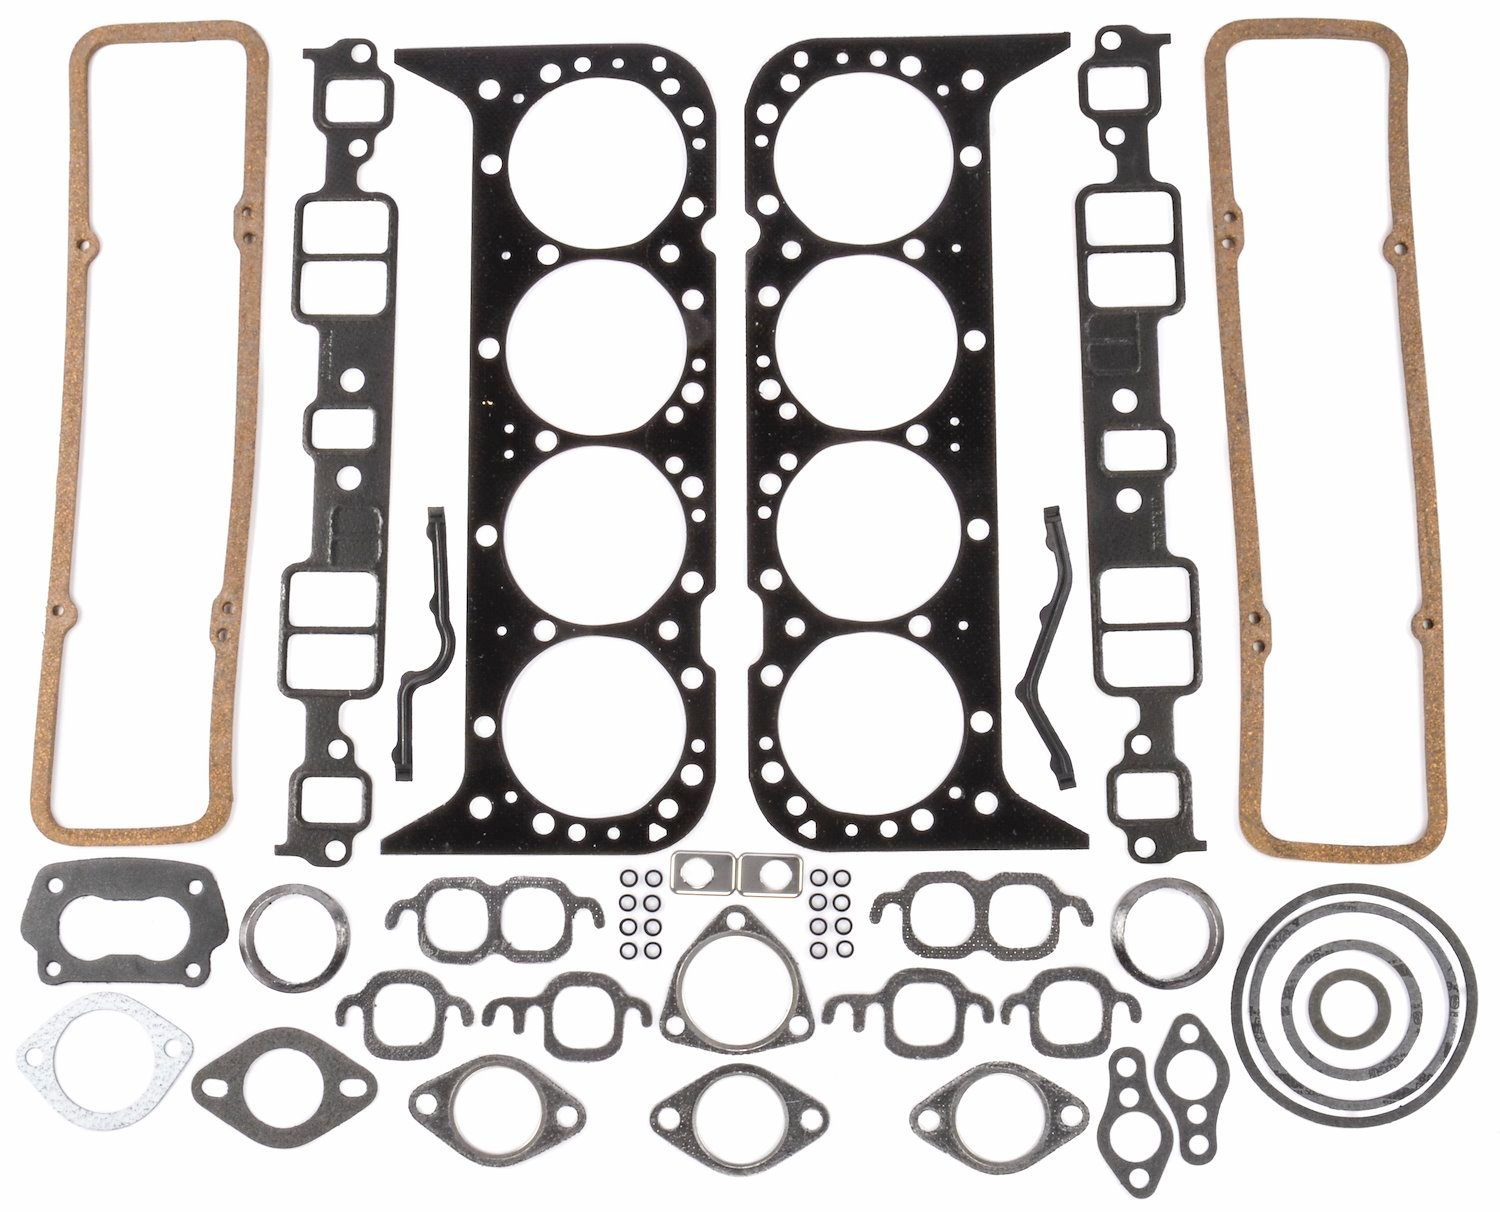 Head Gasket Set for 1957-1980 Small Block Chevy V8